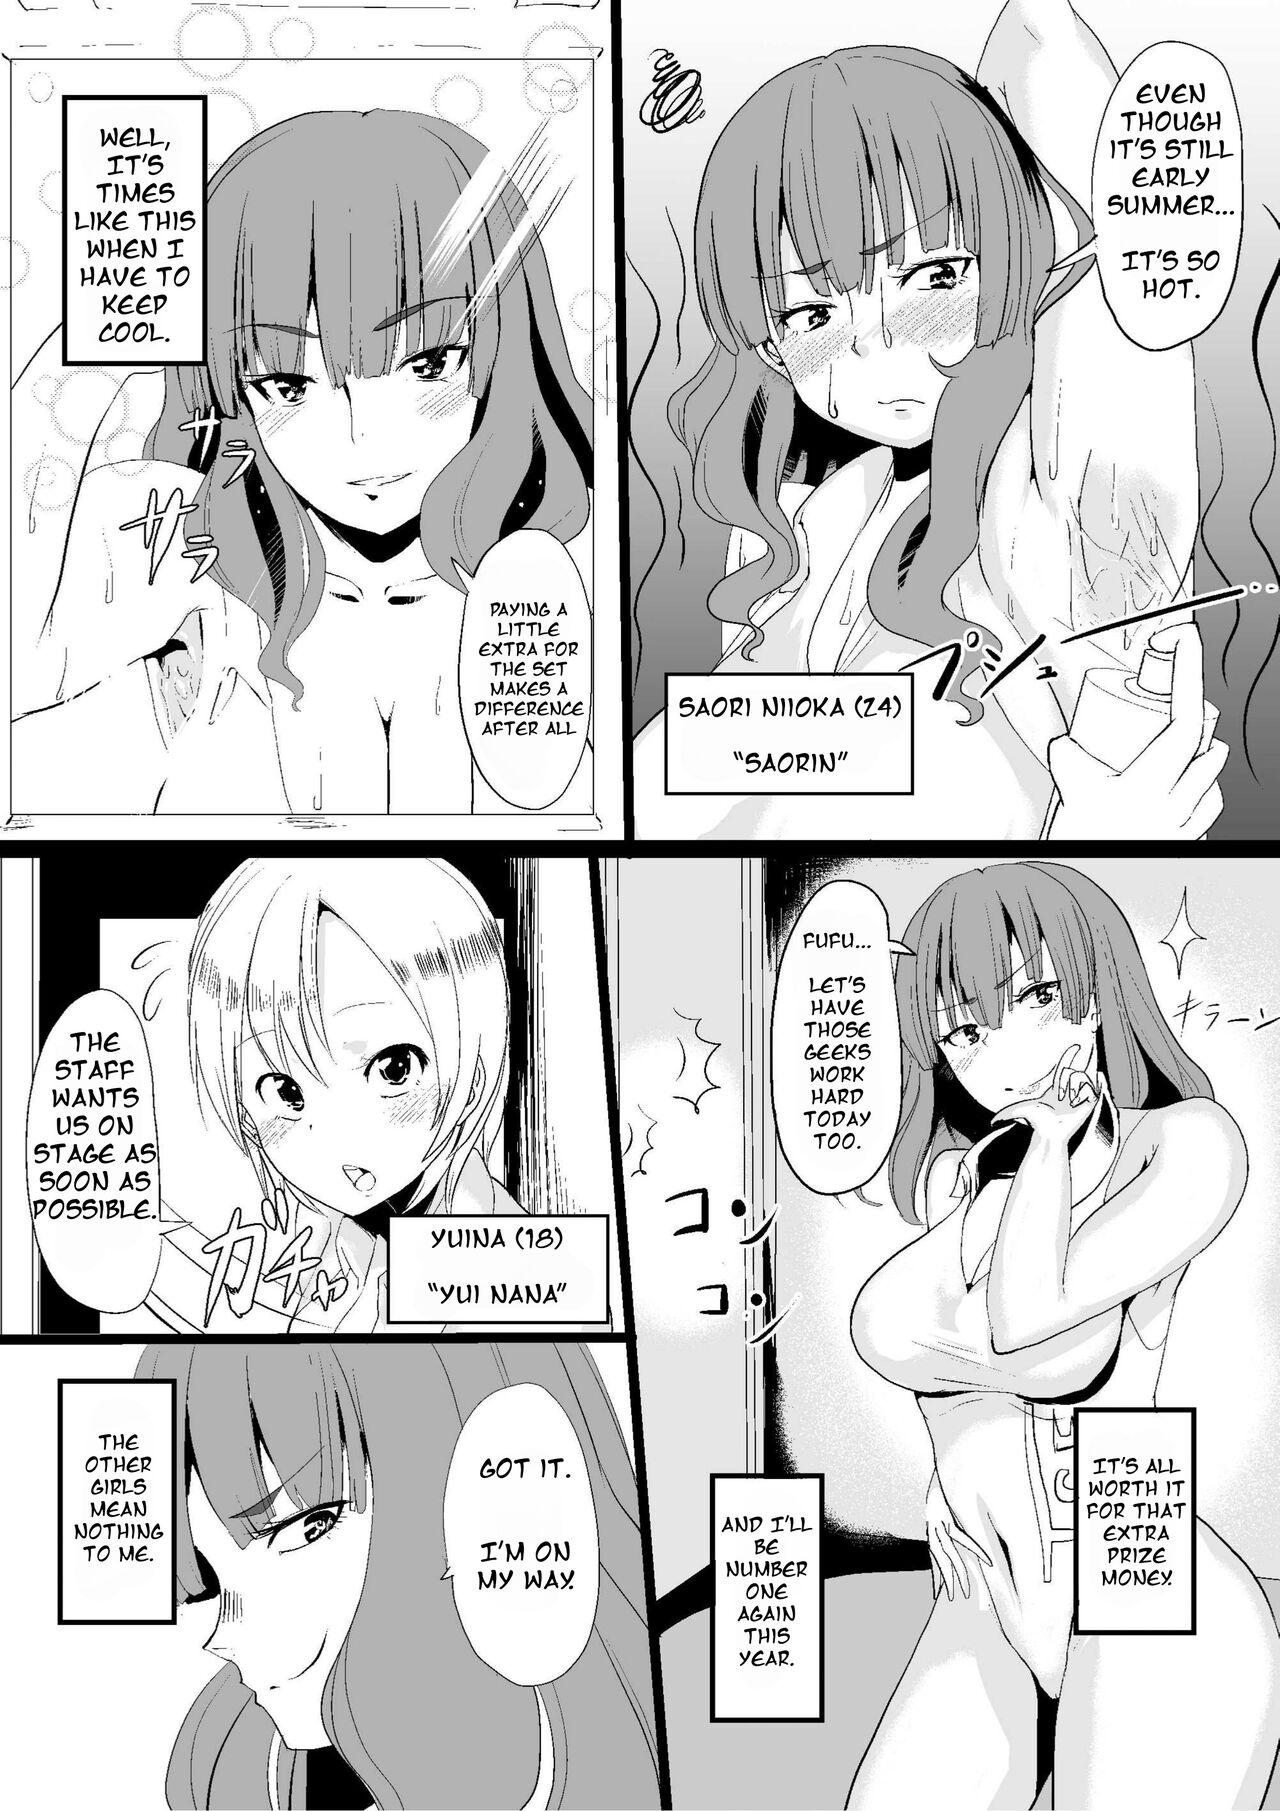 Awesome Onna no Kokoro o Ossanka Suru Camera | Changing a Woman's Heart to an Old Man's With a Camera - Original Hot Wife - Page 3